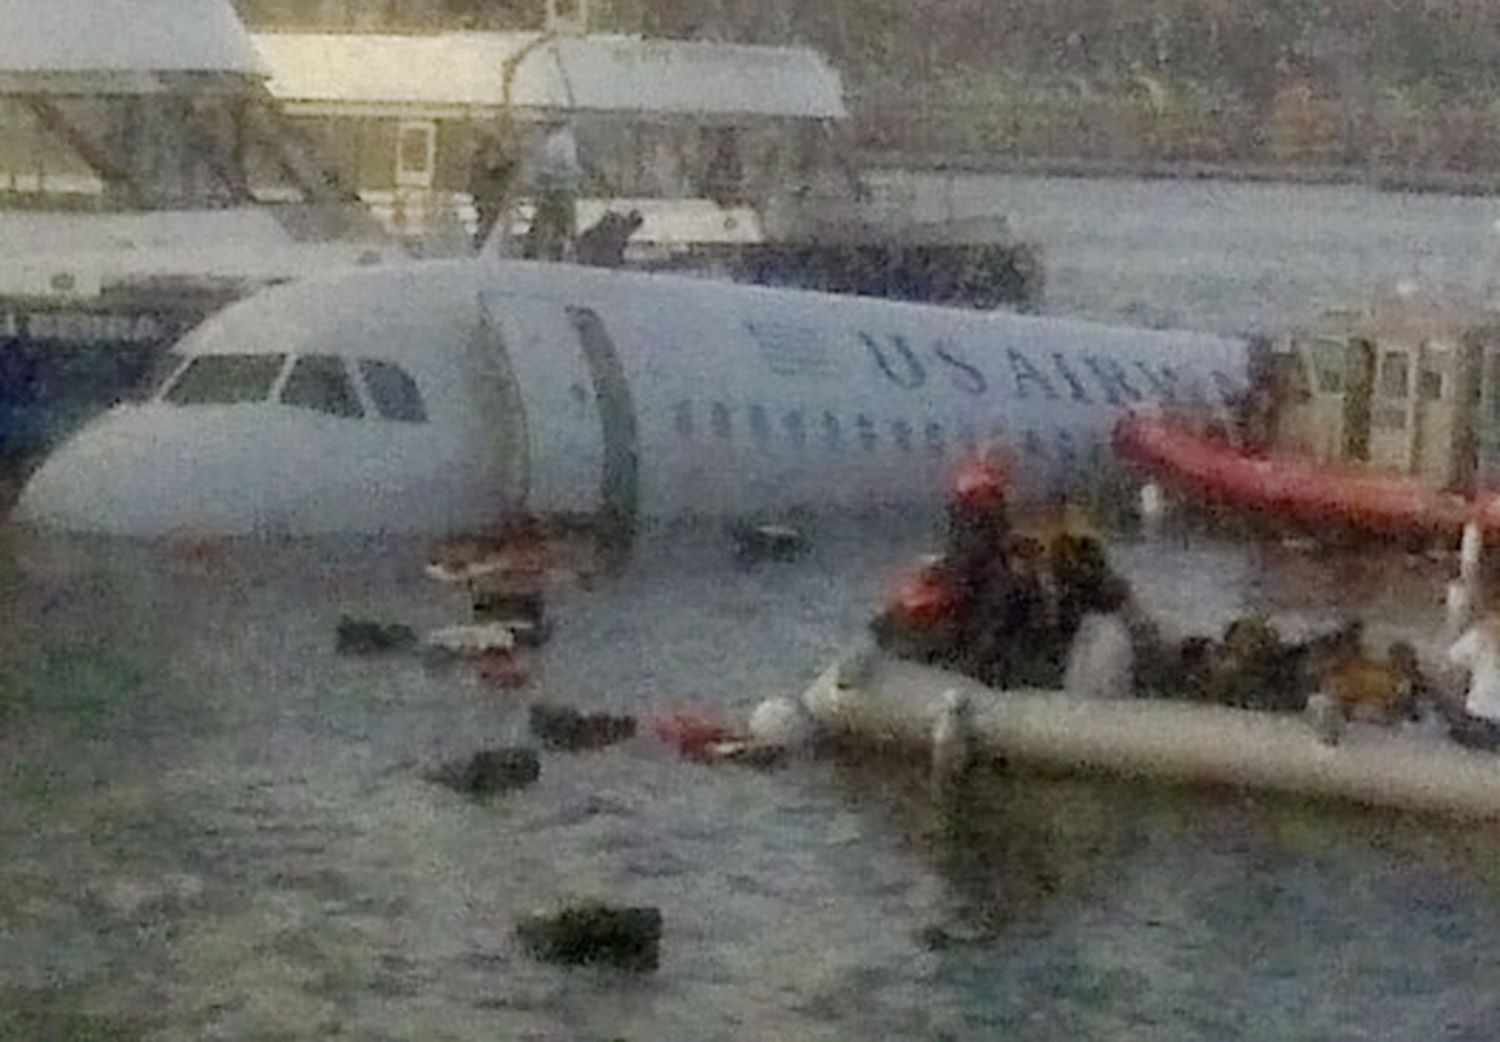 Miracle On the Hudson Rescue flight 1549